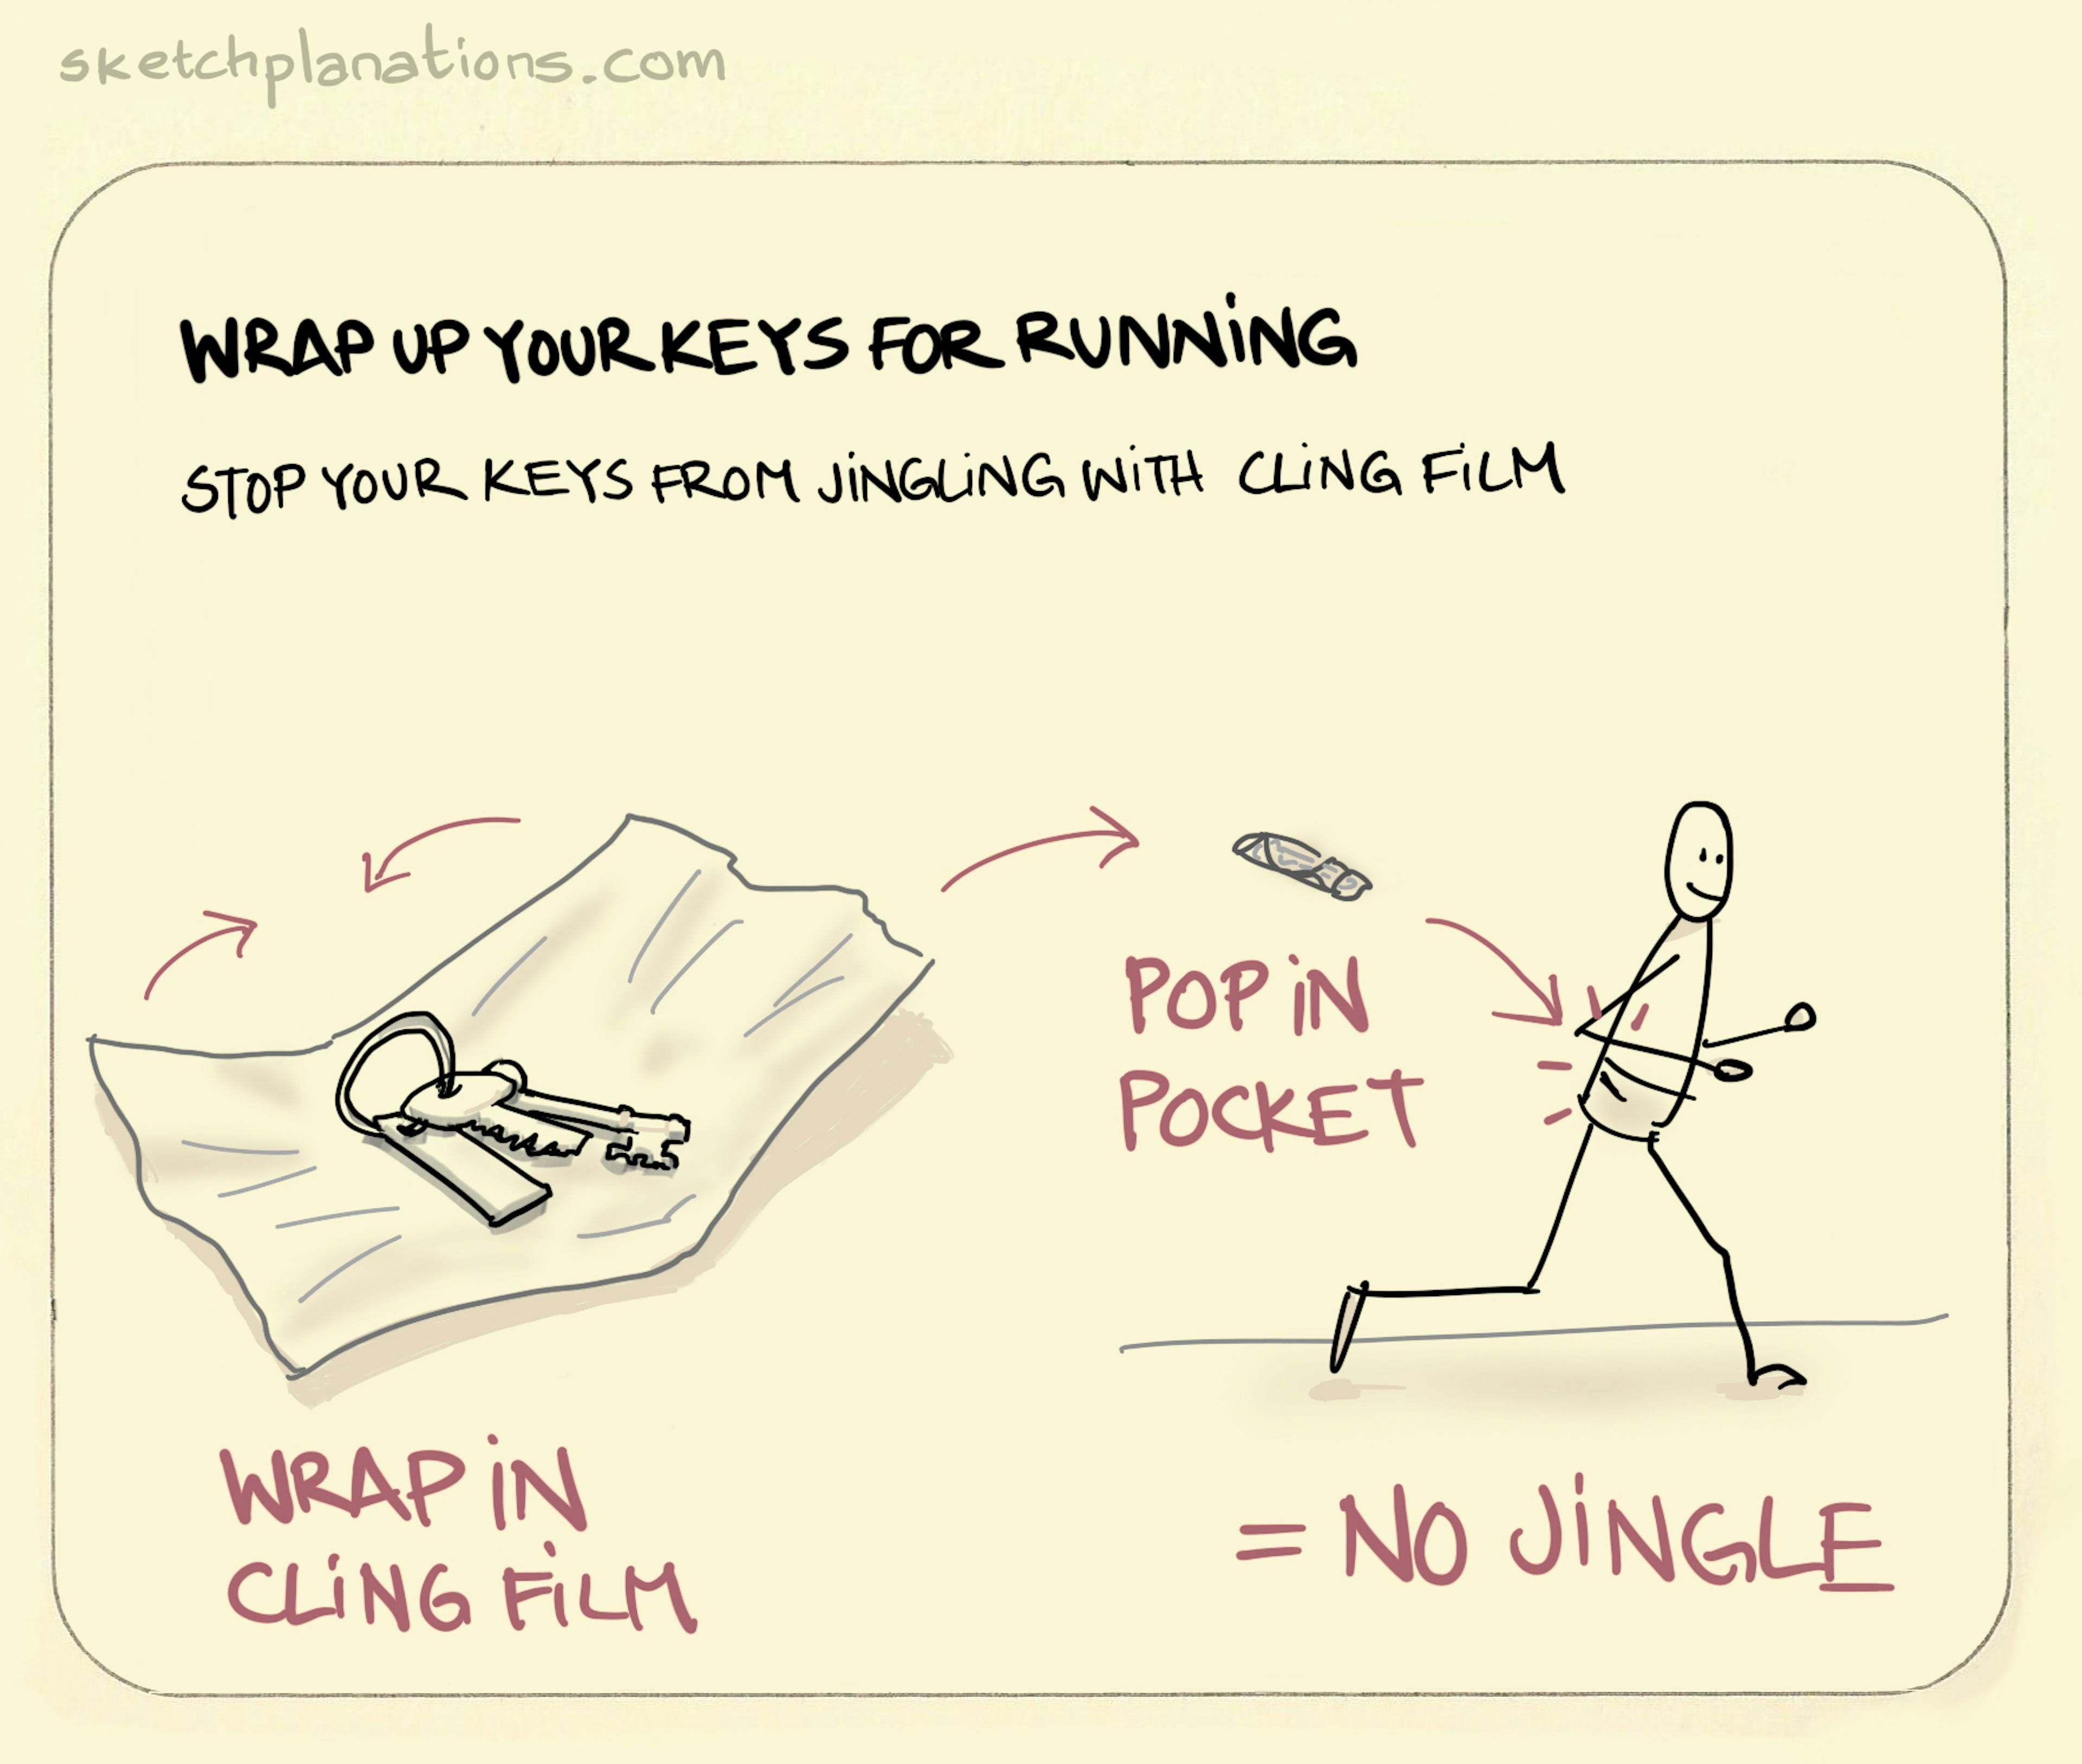 Wrap up your keys for running: a set of keys on a keyring are wrapped up in a small piece of clingfilm. The when the key owner goes out running, they have a smile on their face as there's no jingling coming from their pocket. 